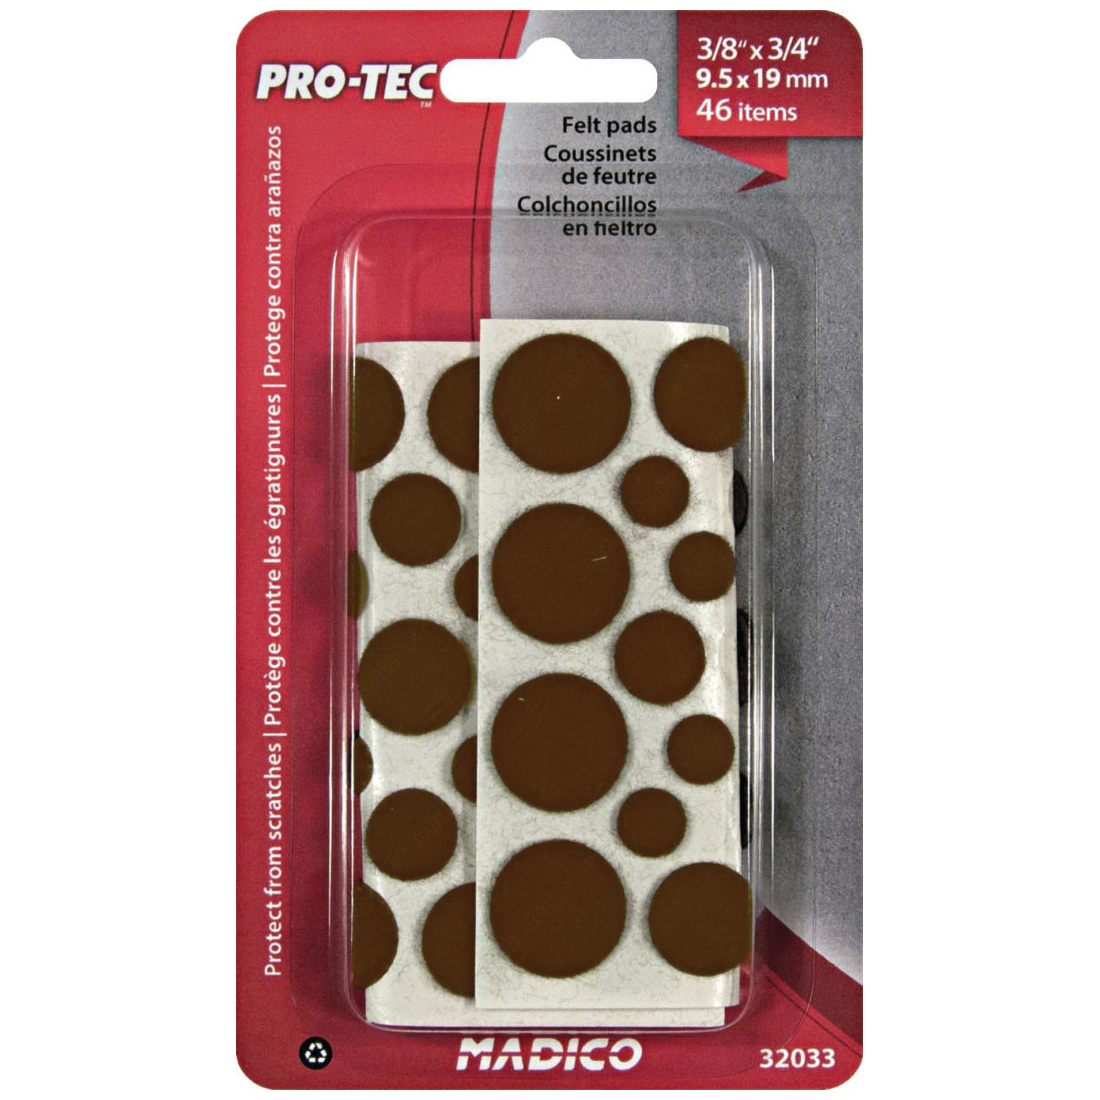 Madico PRO-TEC F32033TV Medium Felt Pad, Polyester, Brown, 3/8 to 3/4 in Dia, 1/16 in Thick, Round - 2